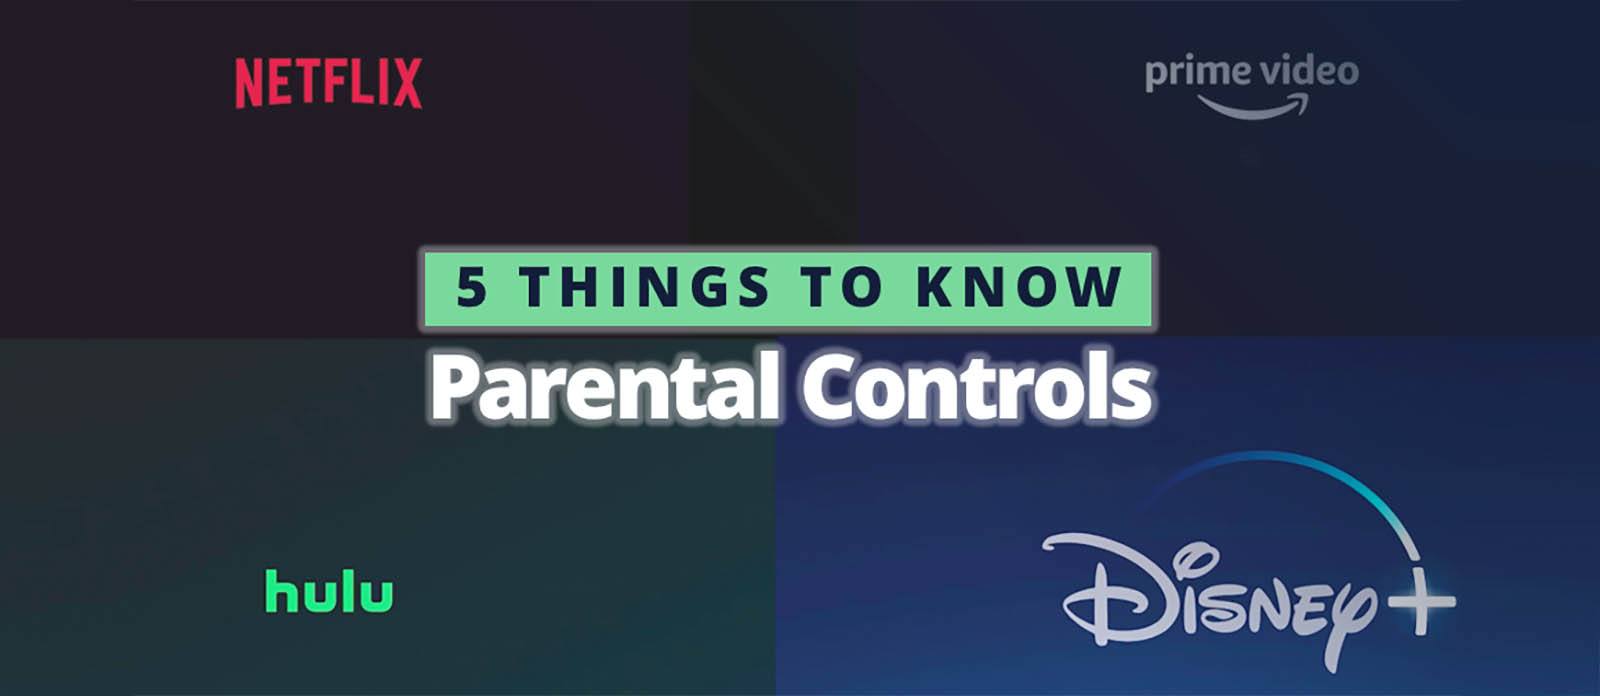 Video: 5 Things You Should Know About Parental Controls and Streaming Services